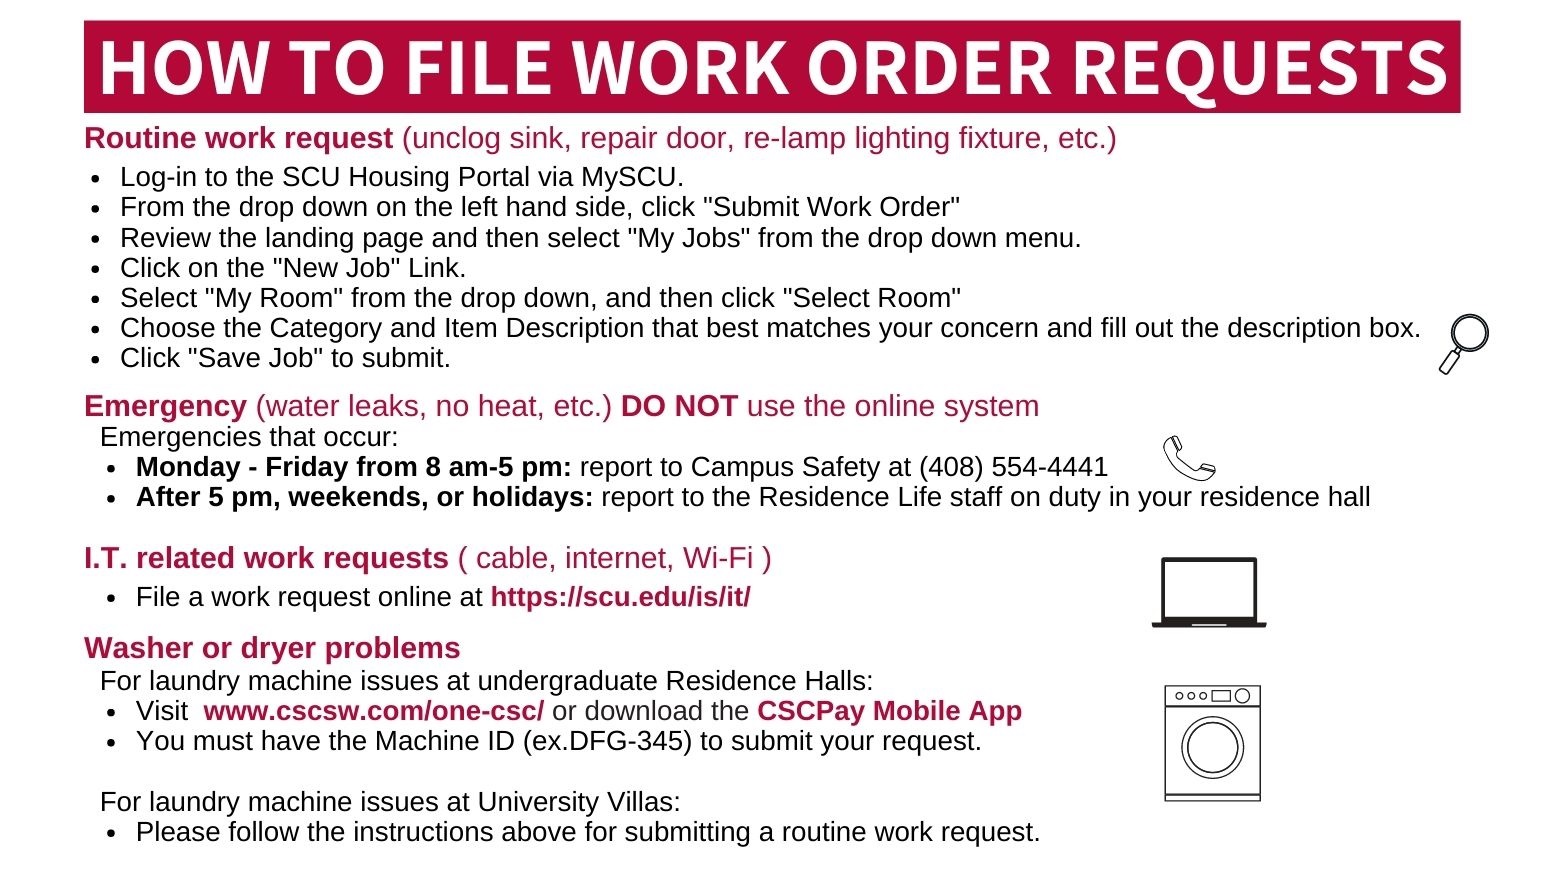 How to file work order requests